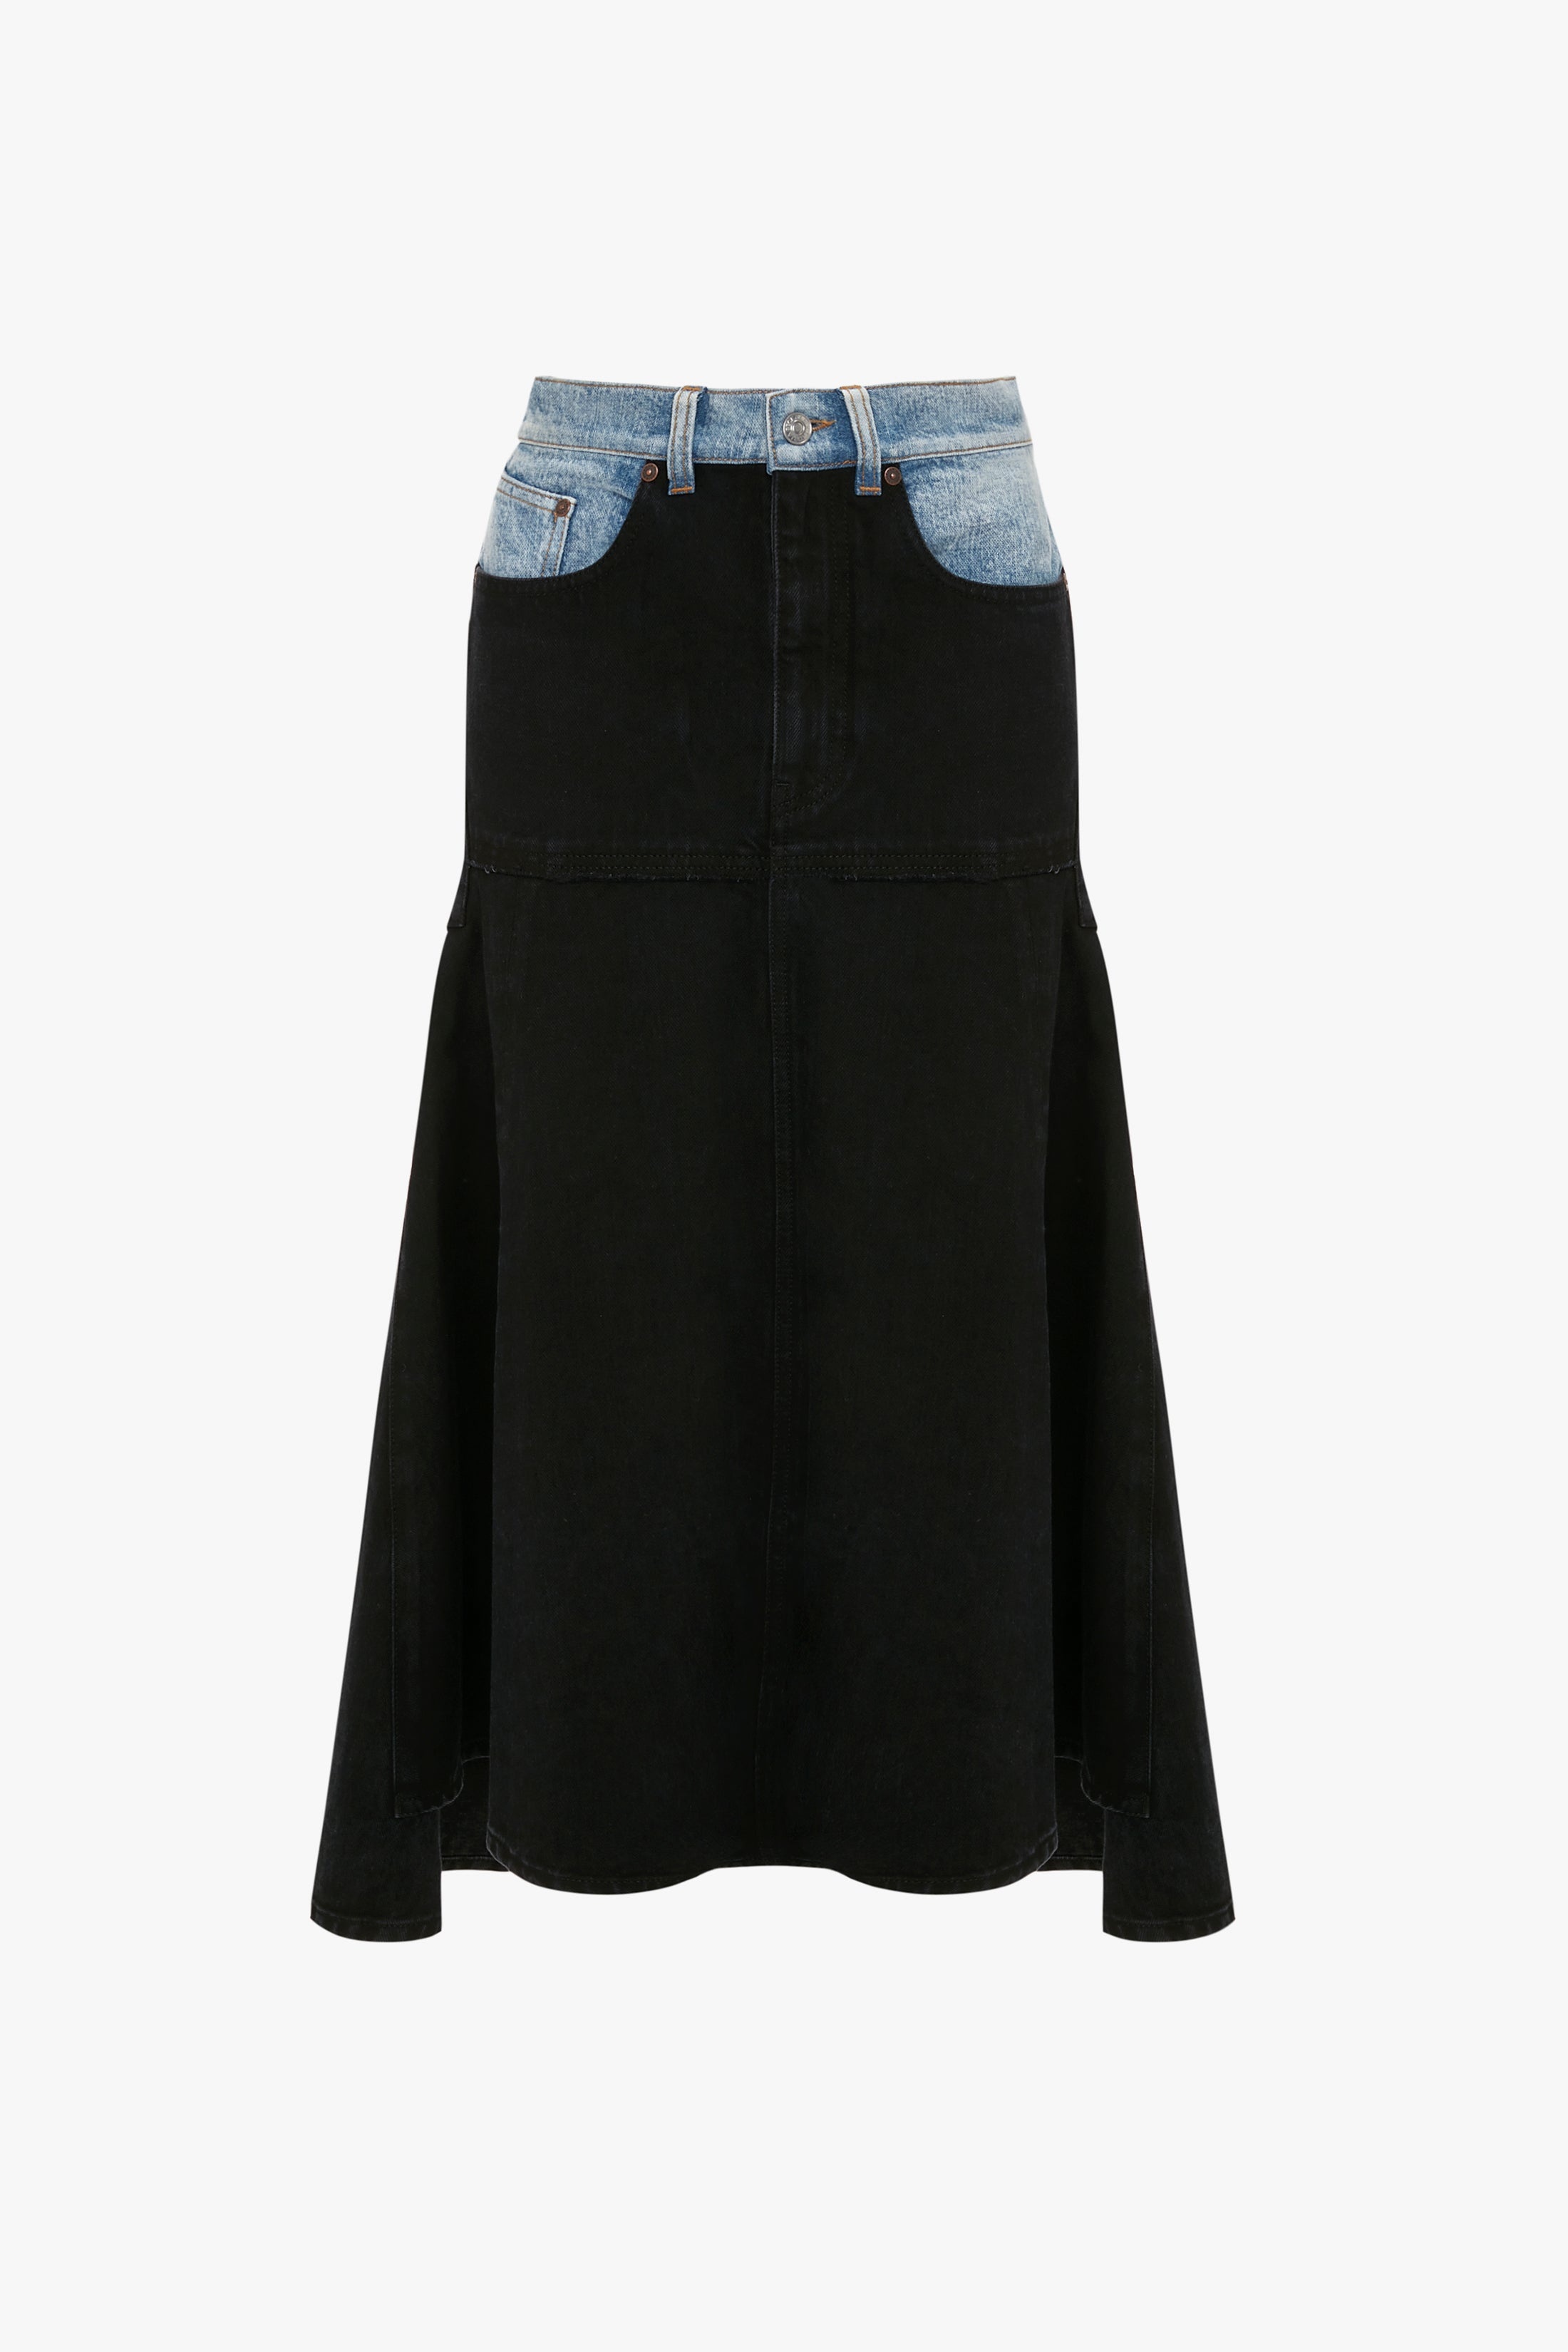 Patched Denim Skirt In Contrast Wash - 1